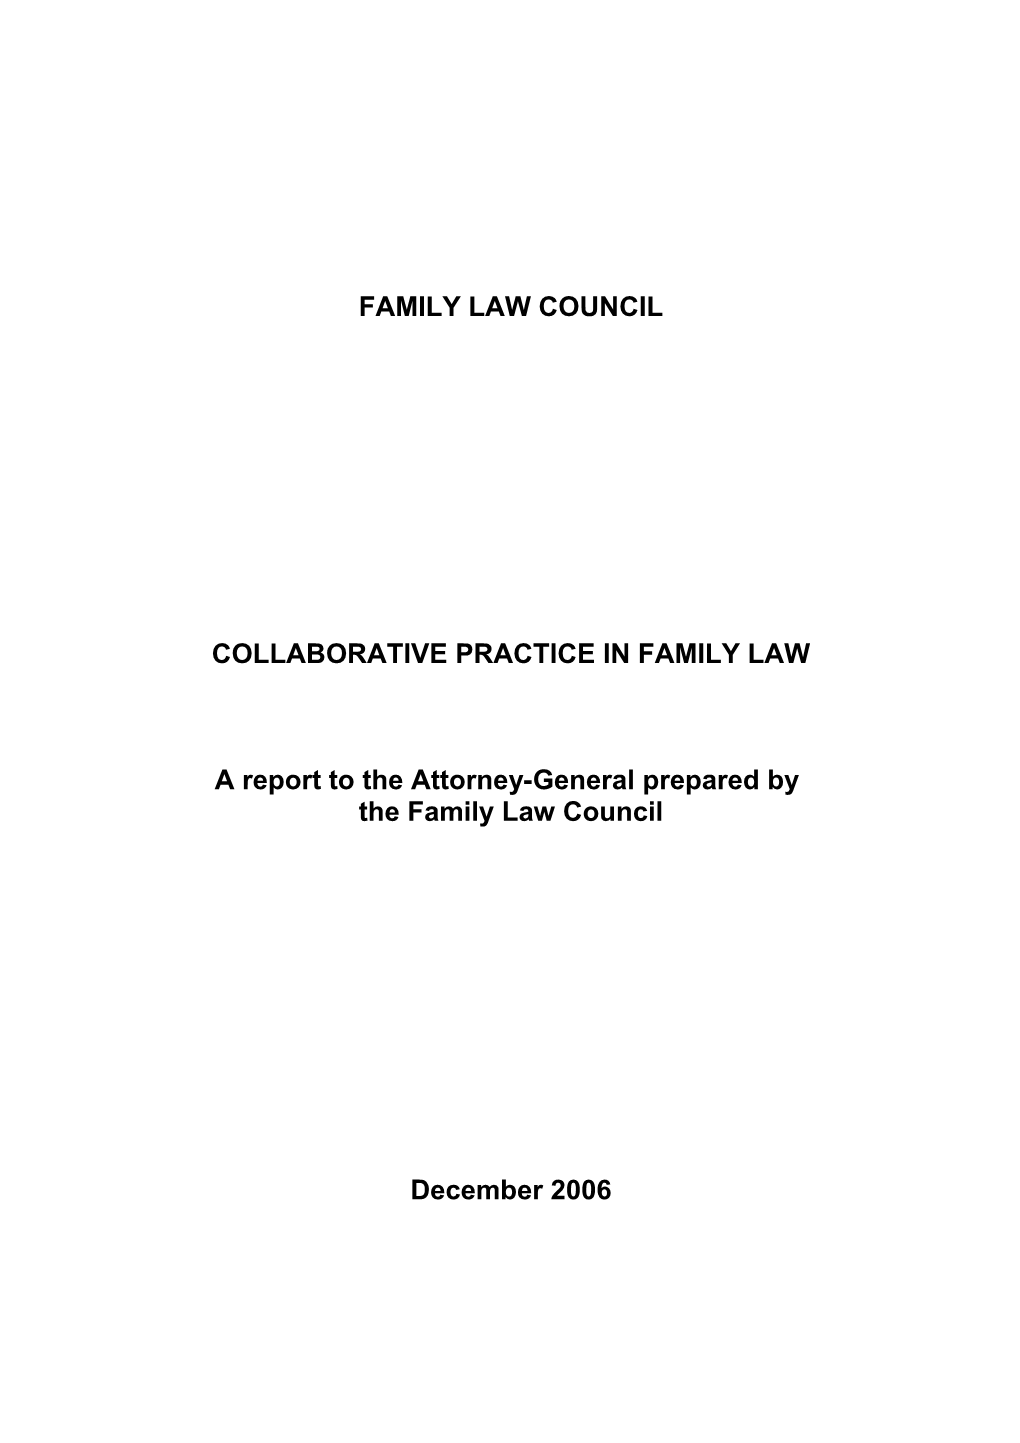 Collaborative Practice in Family Law